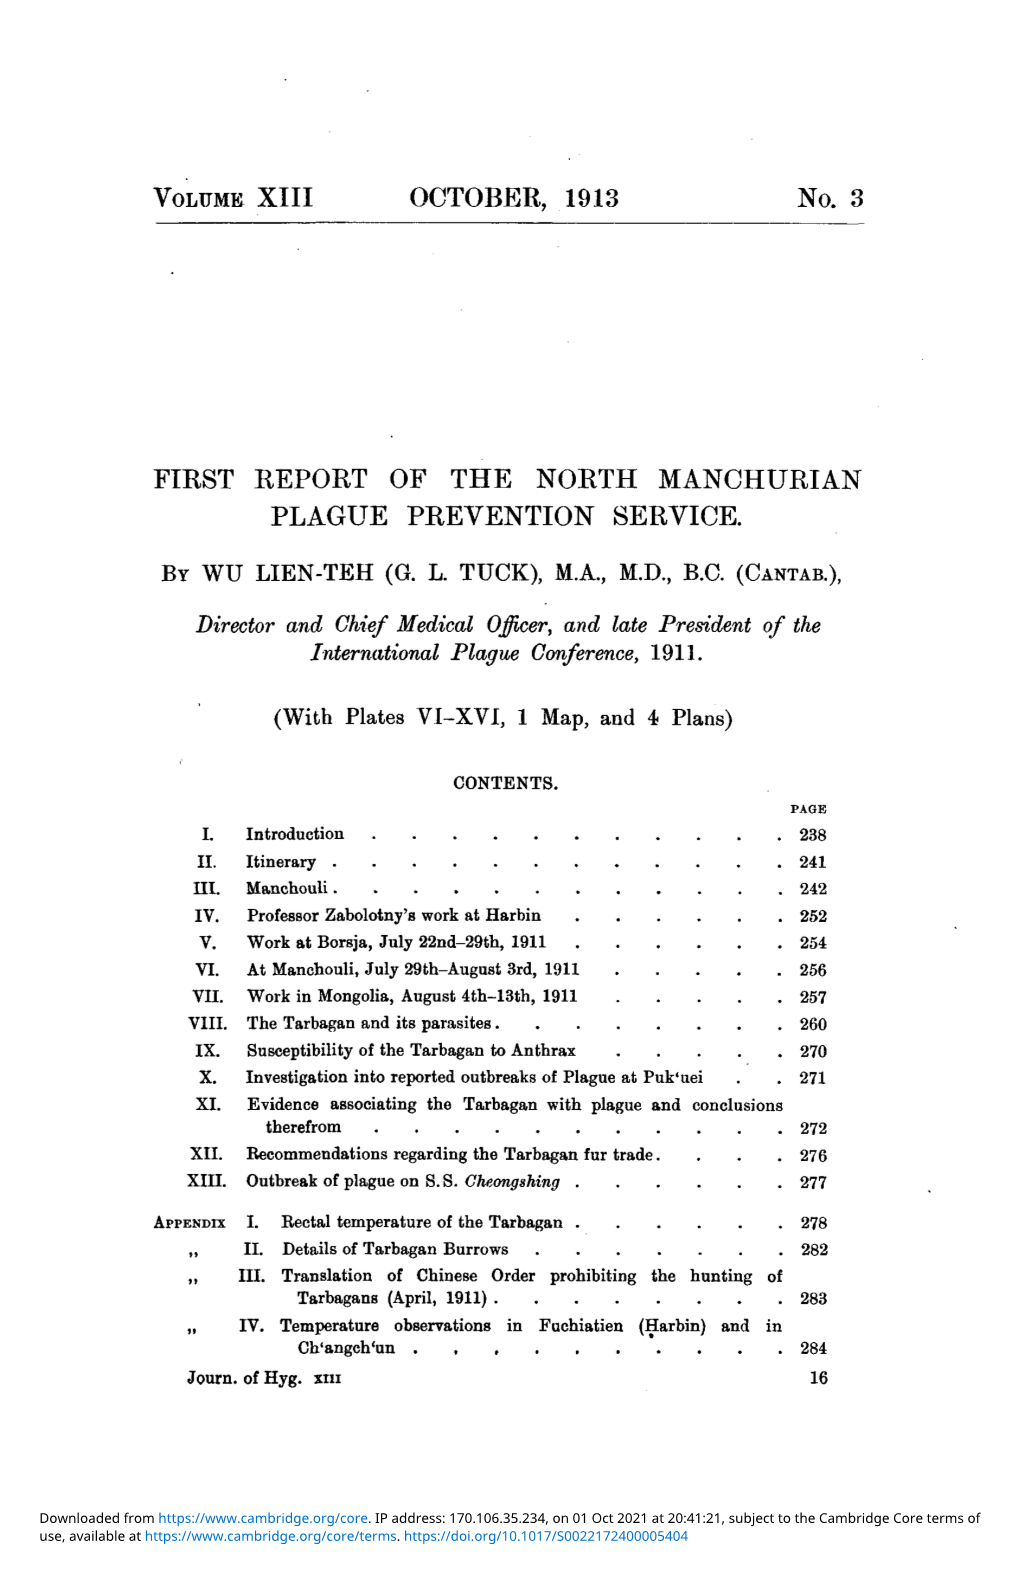 First Report of the North Manchurian Plague Prevention Service